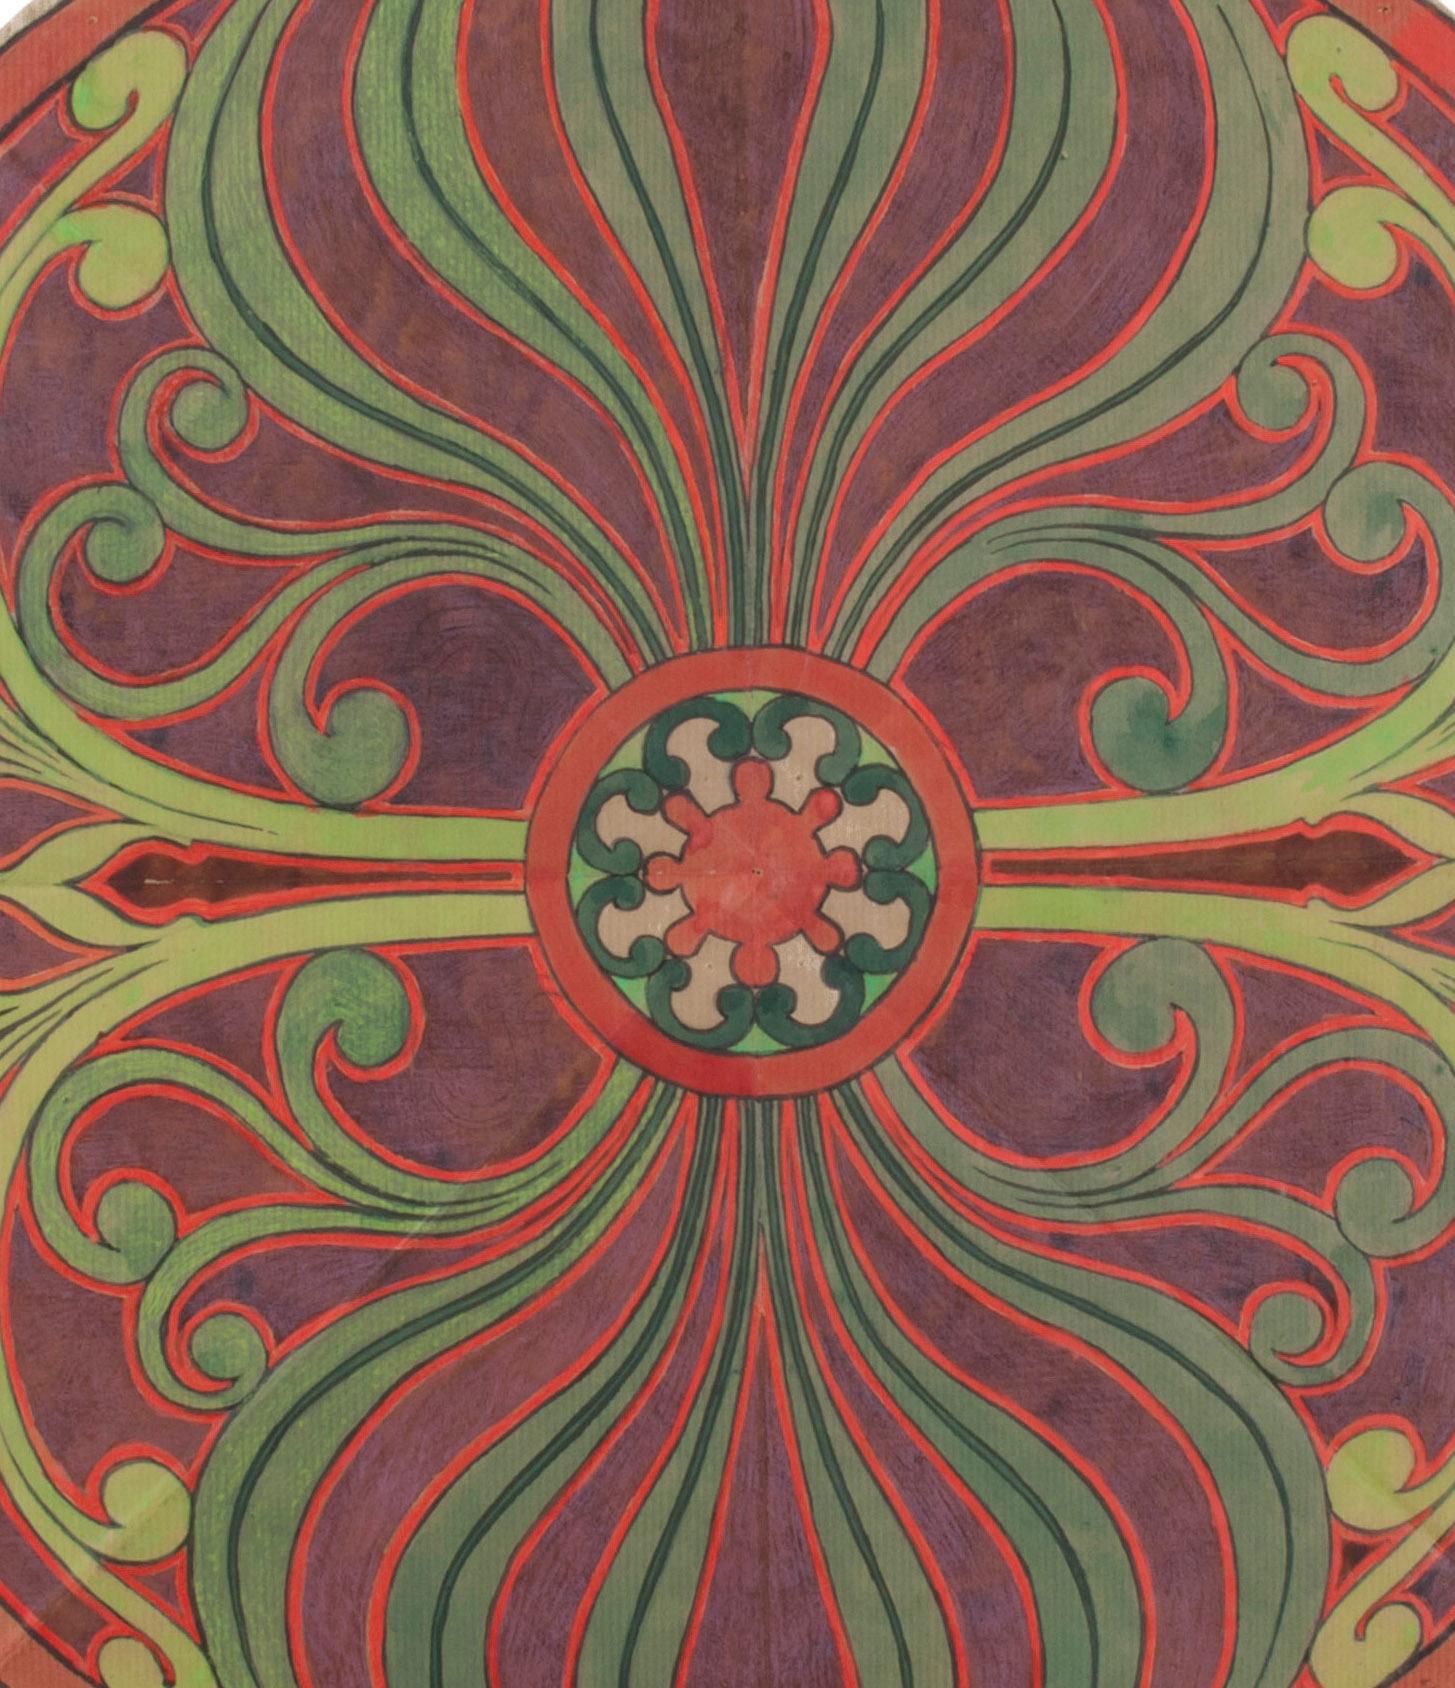 Unknown Artist, France, late 19th century
Anonymous c. 1900 Rondelle on antique laid paper
Ink, Watercolor and or Gouache
Unsigned
An Art Nouveau preliminary design for a decorative project
Influenced or similar to the decorative designs of Alphonse